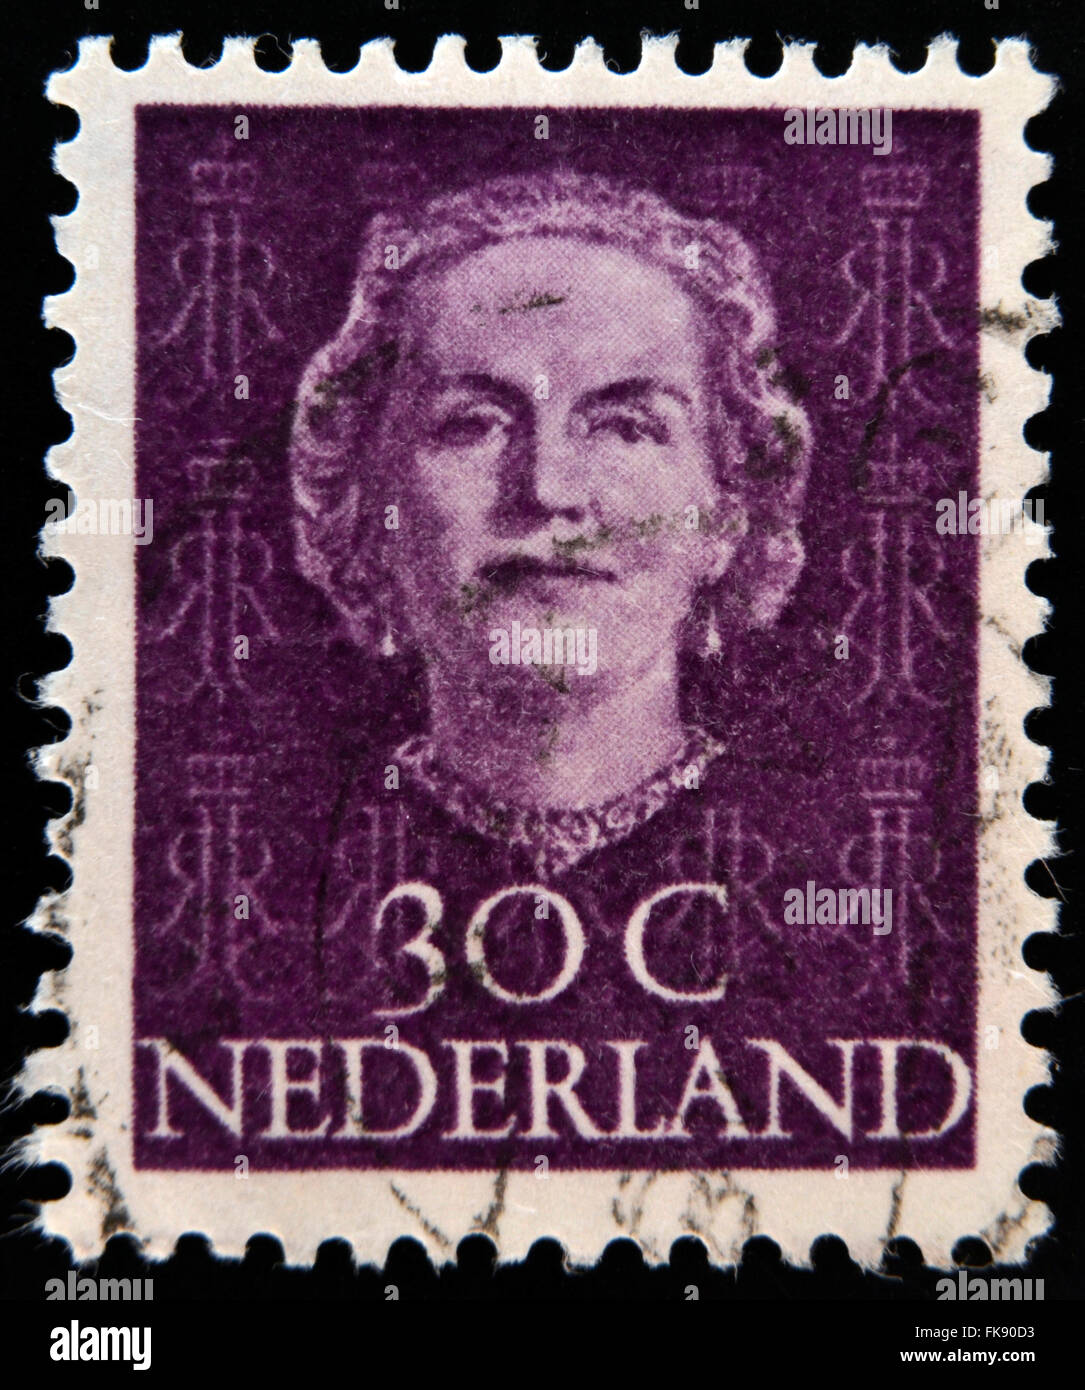 NETHERLANDS - CIRCA 1970: A stamp printed in the Holland shows image of Queen Juliana, circa 1970 Stock Photo